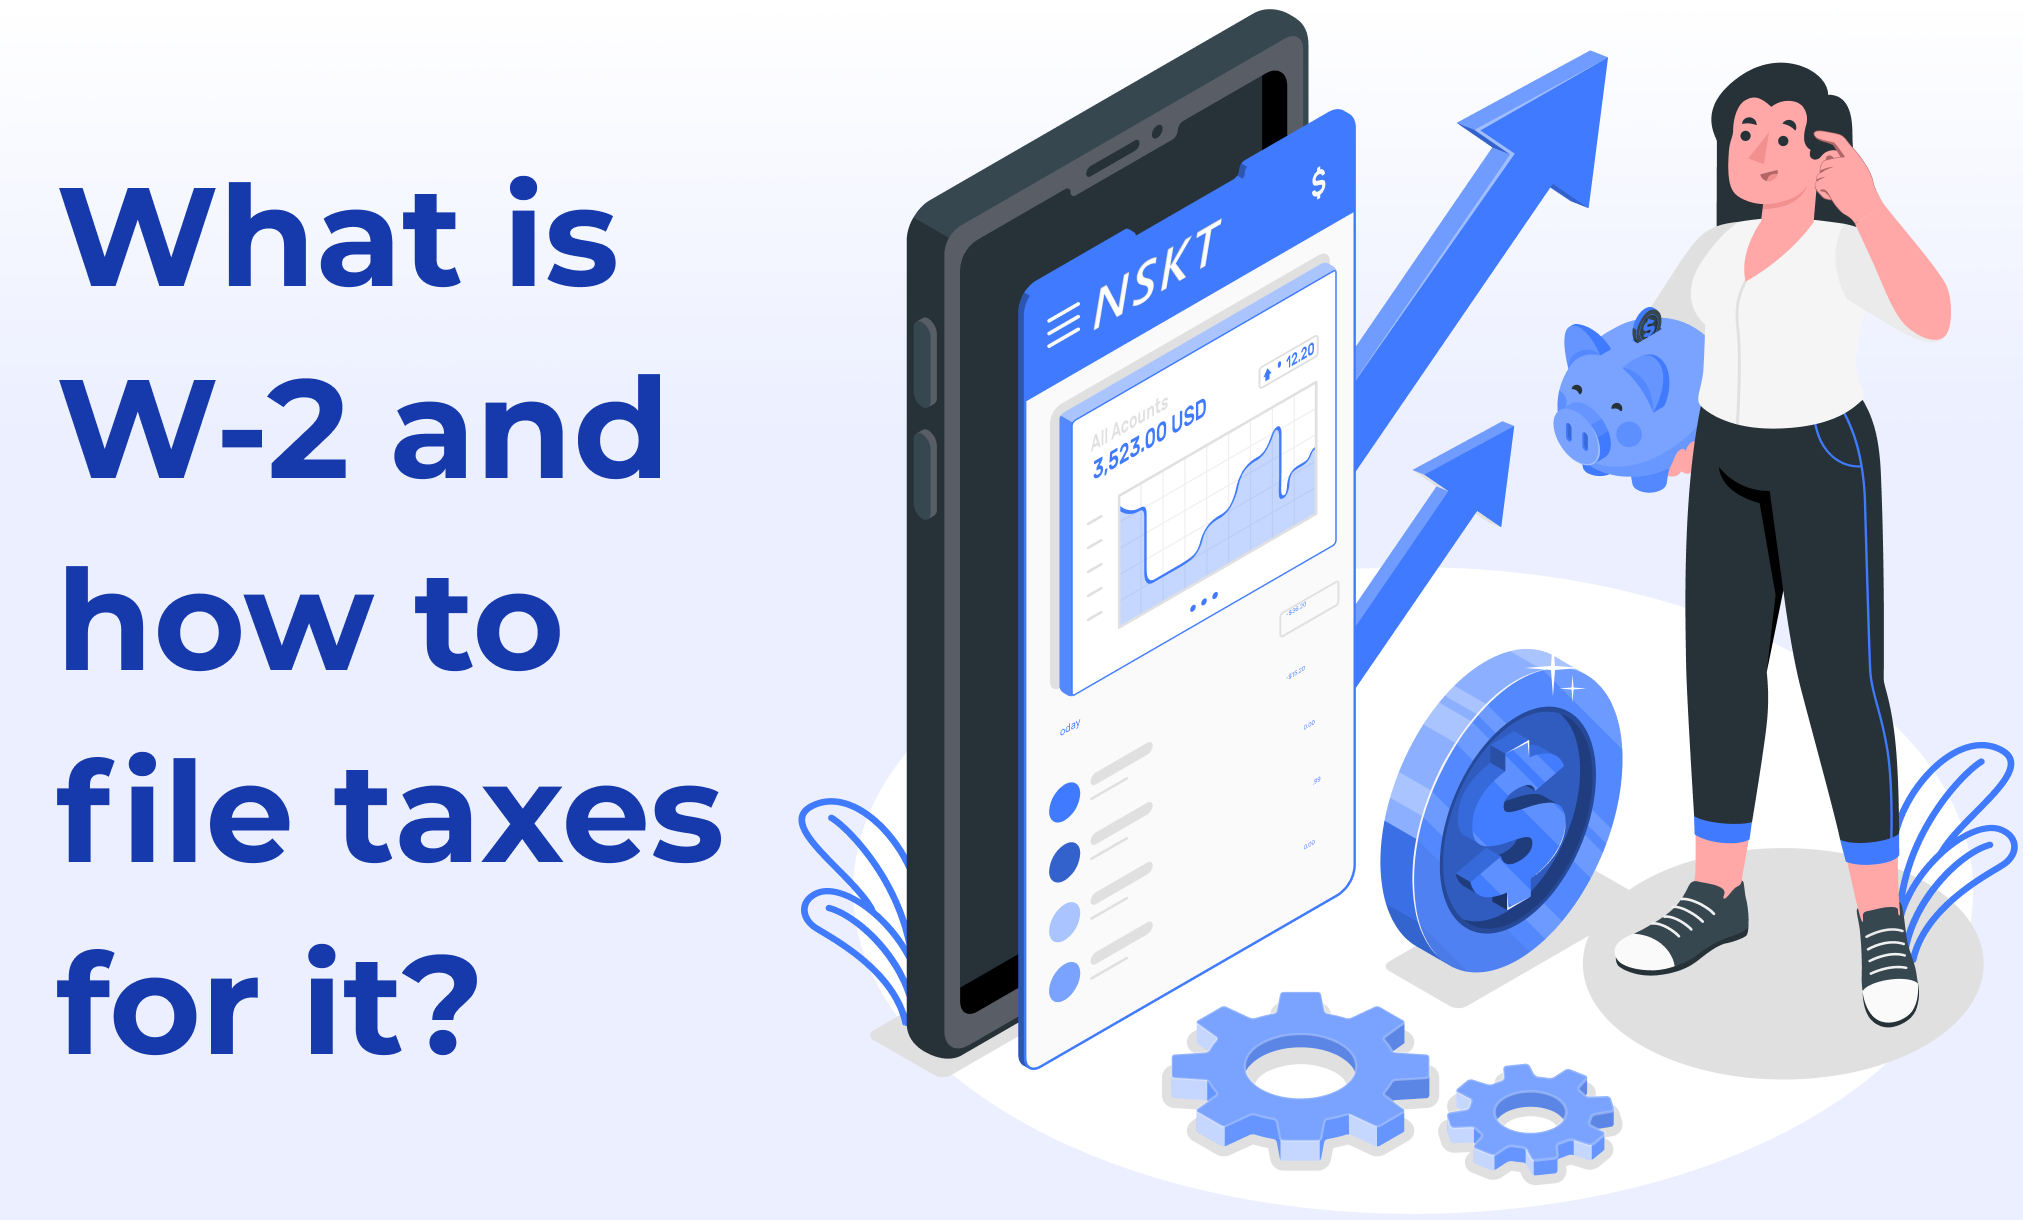 What is W-2 & 1099 and how to file taxes for it?